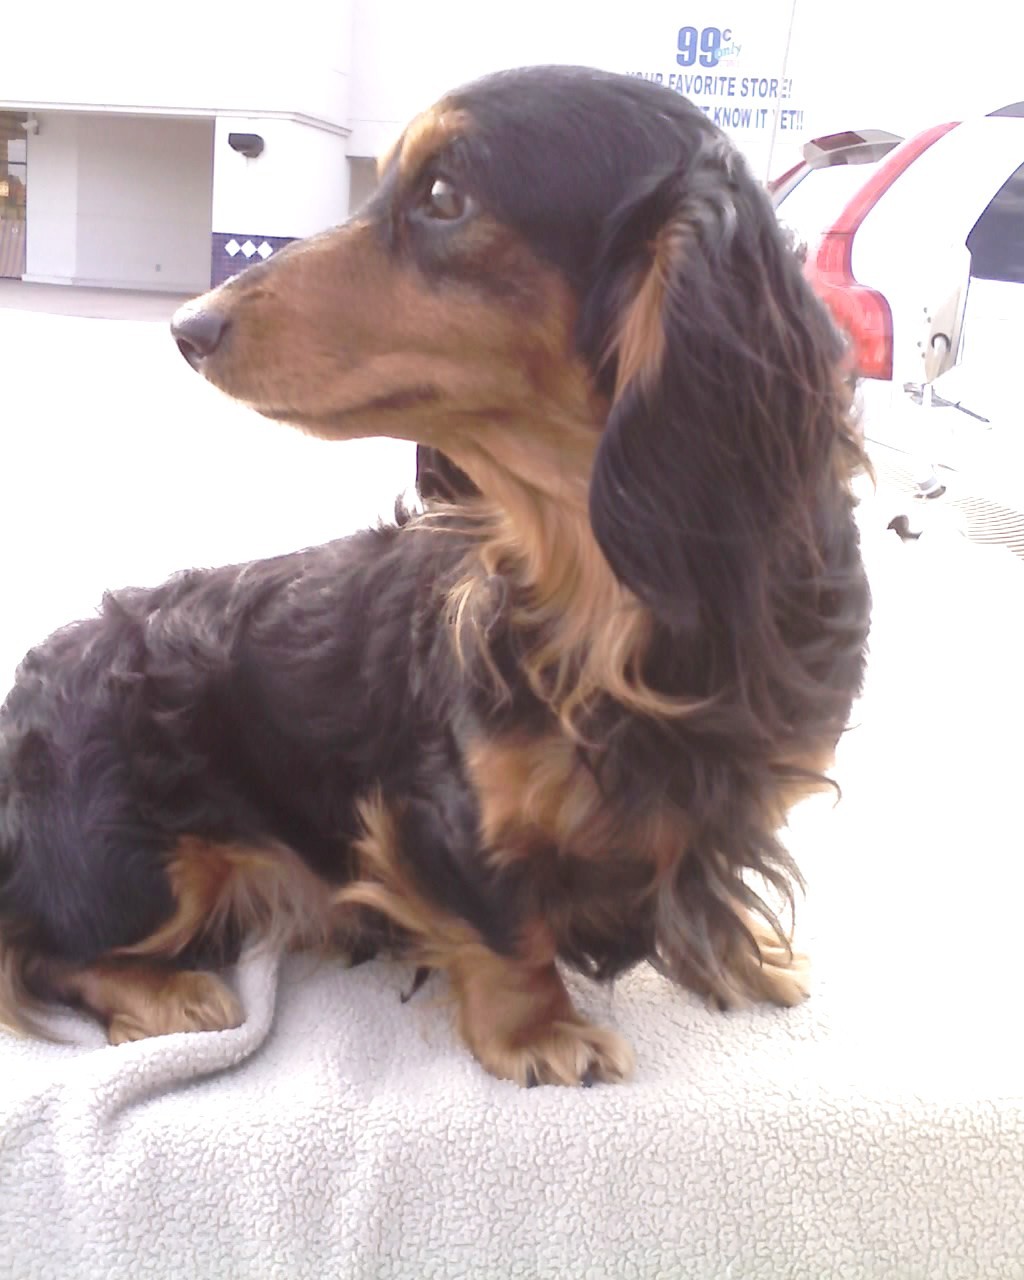 Miniature Dachshund Long Haired Breed Information History Health